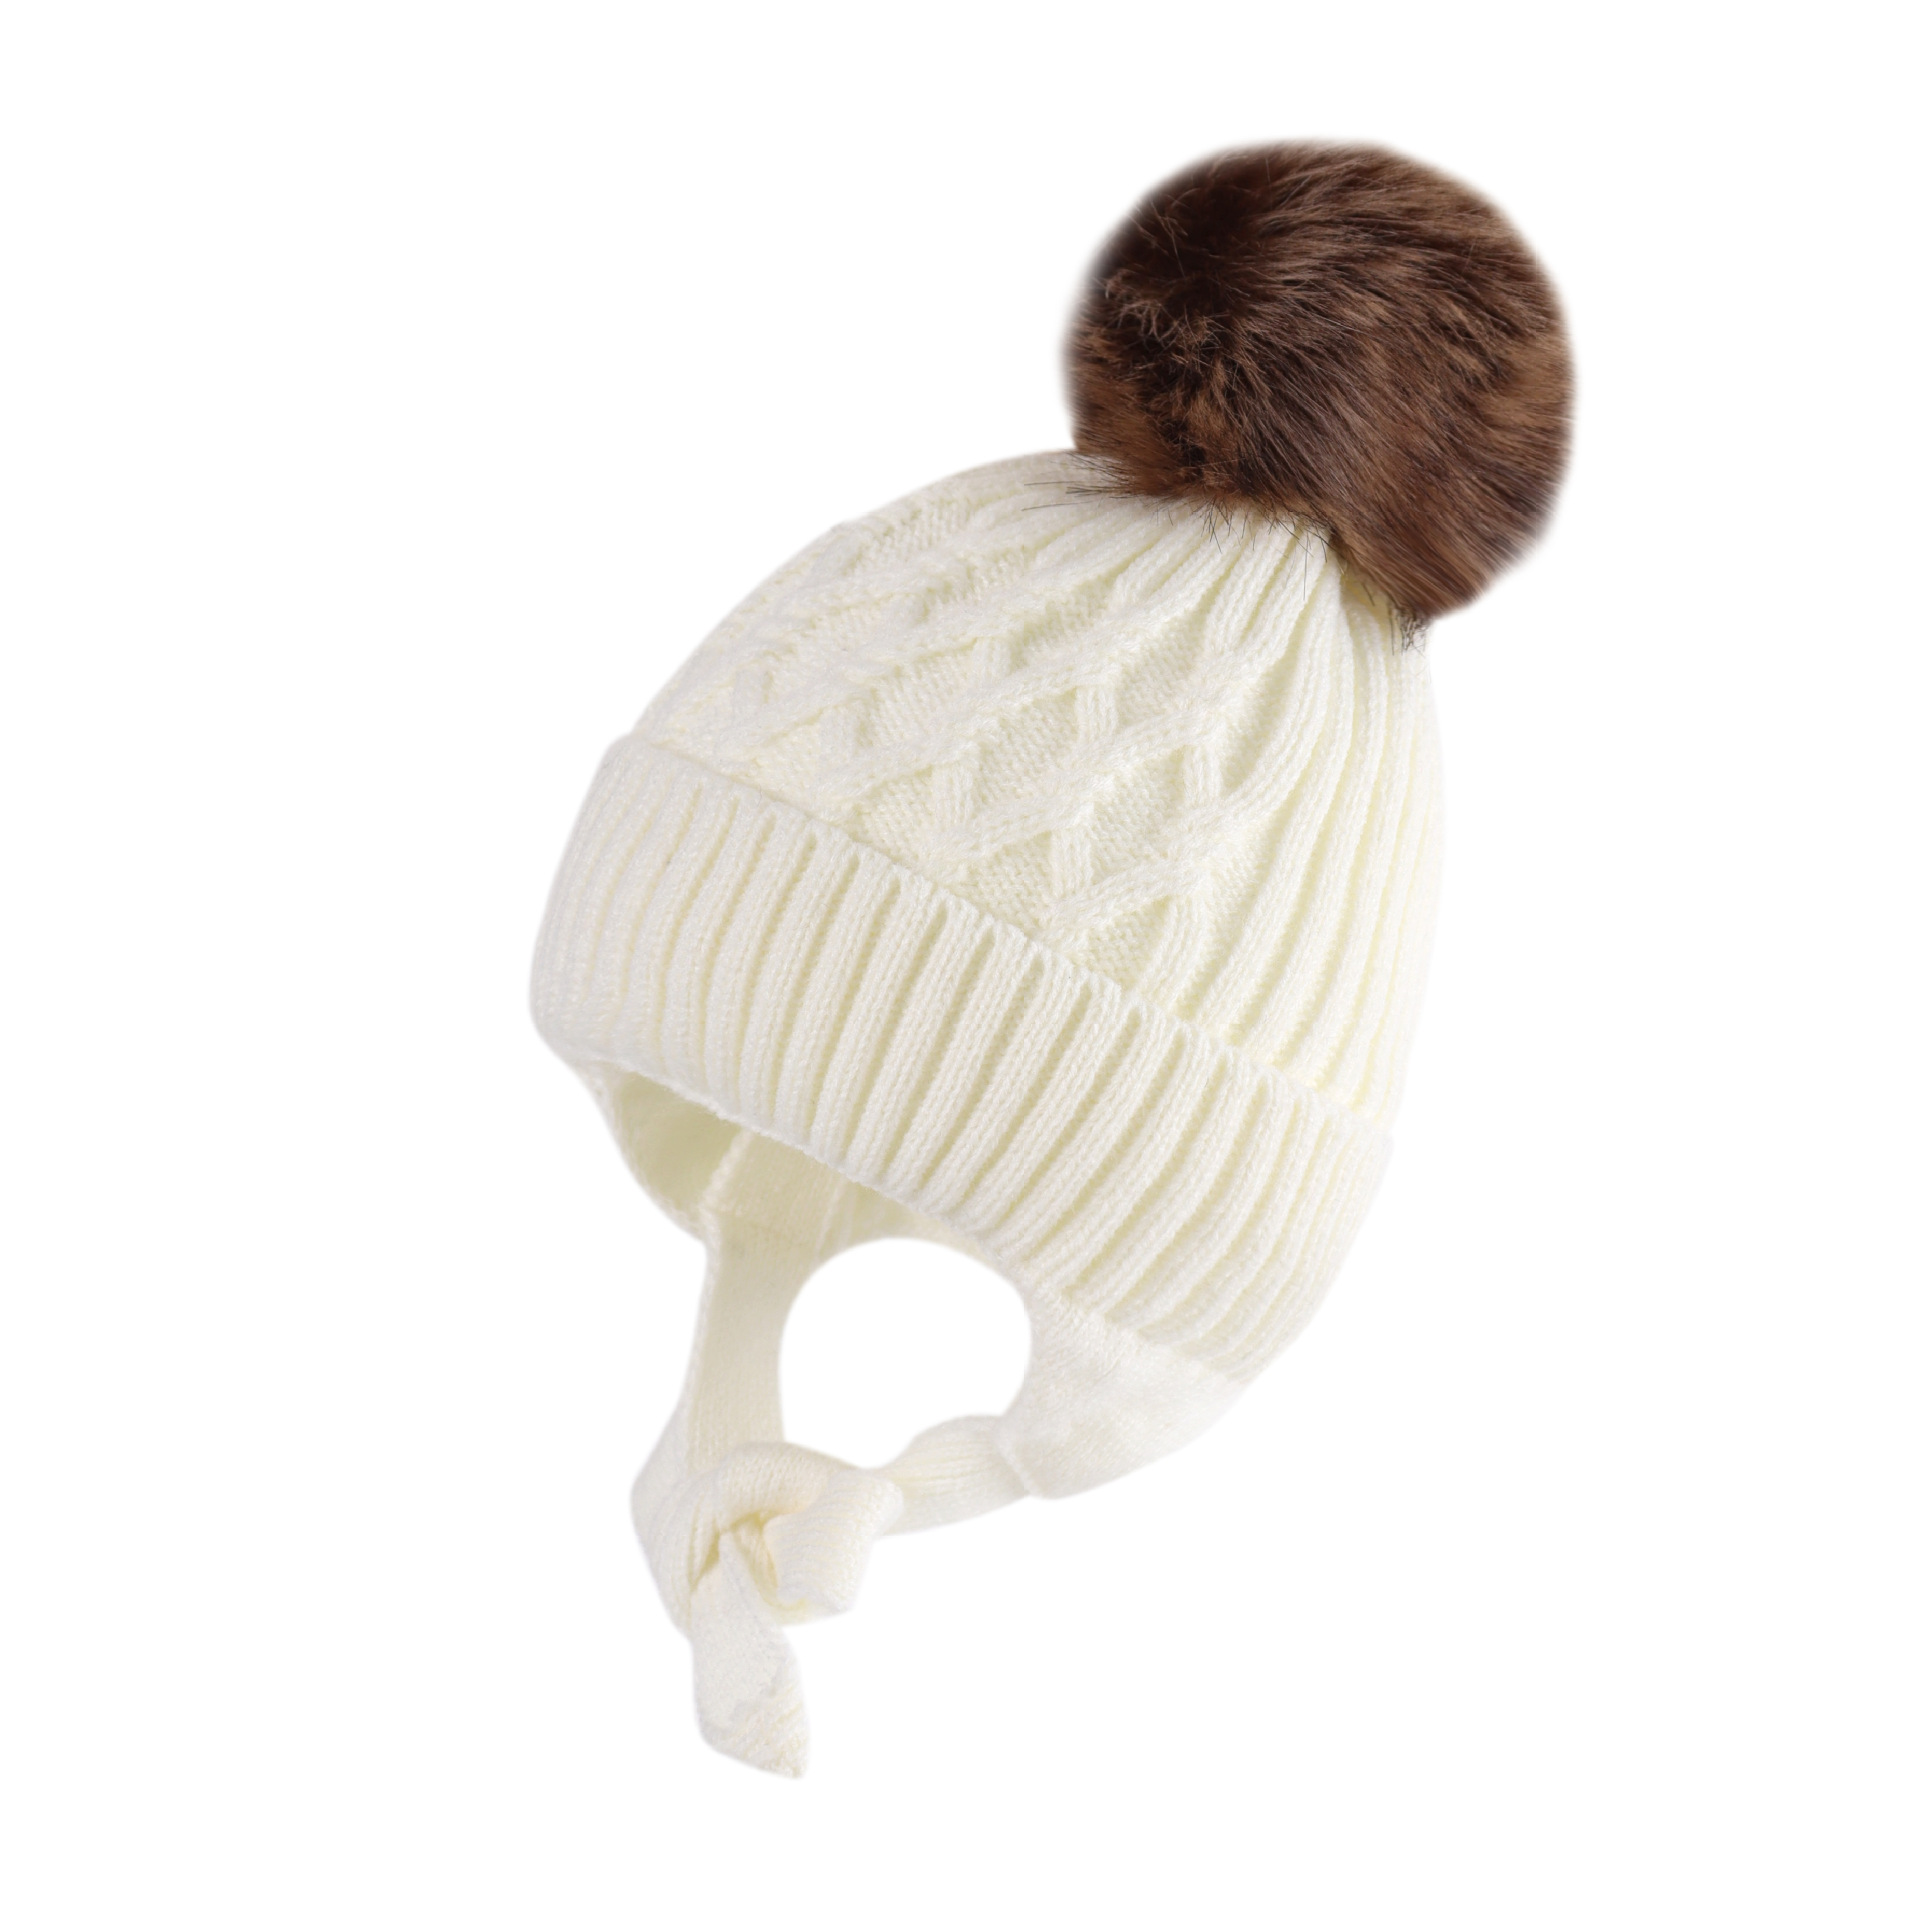 Plush wool hat with versatile windproof ear protectors and headgear